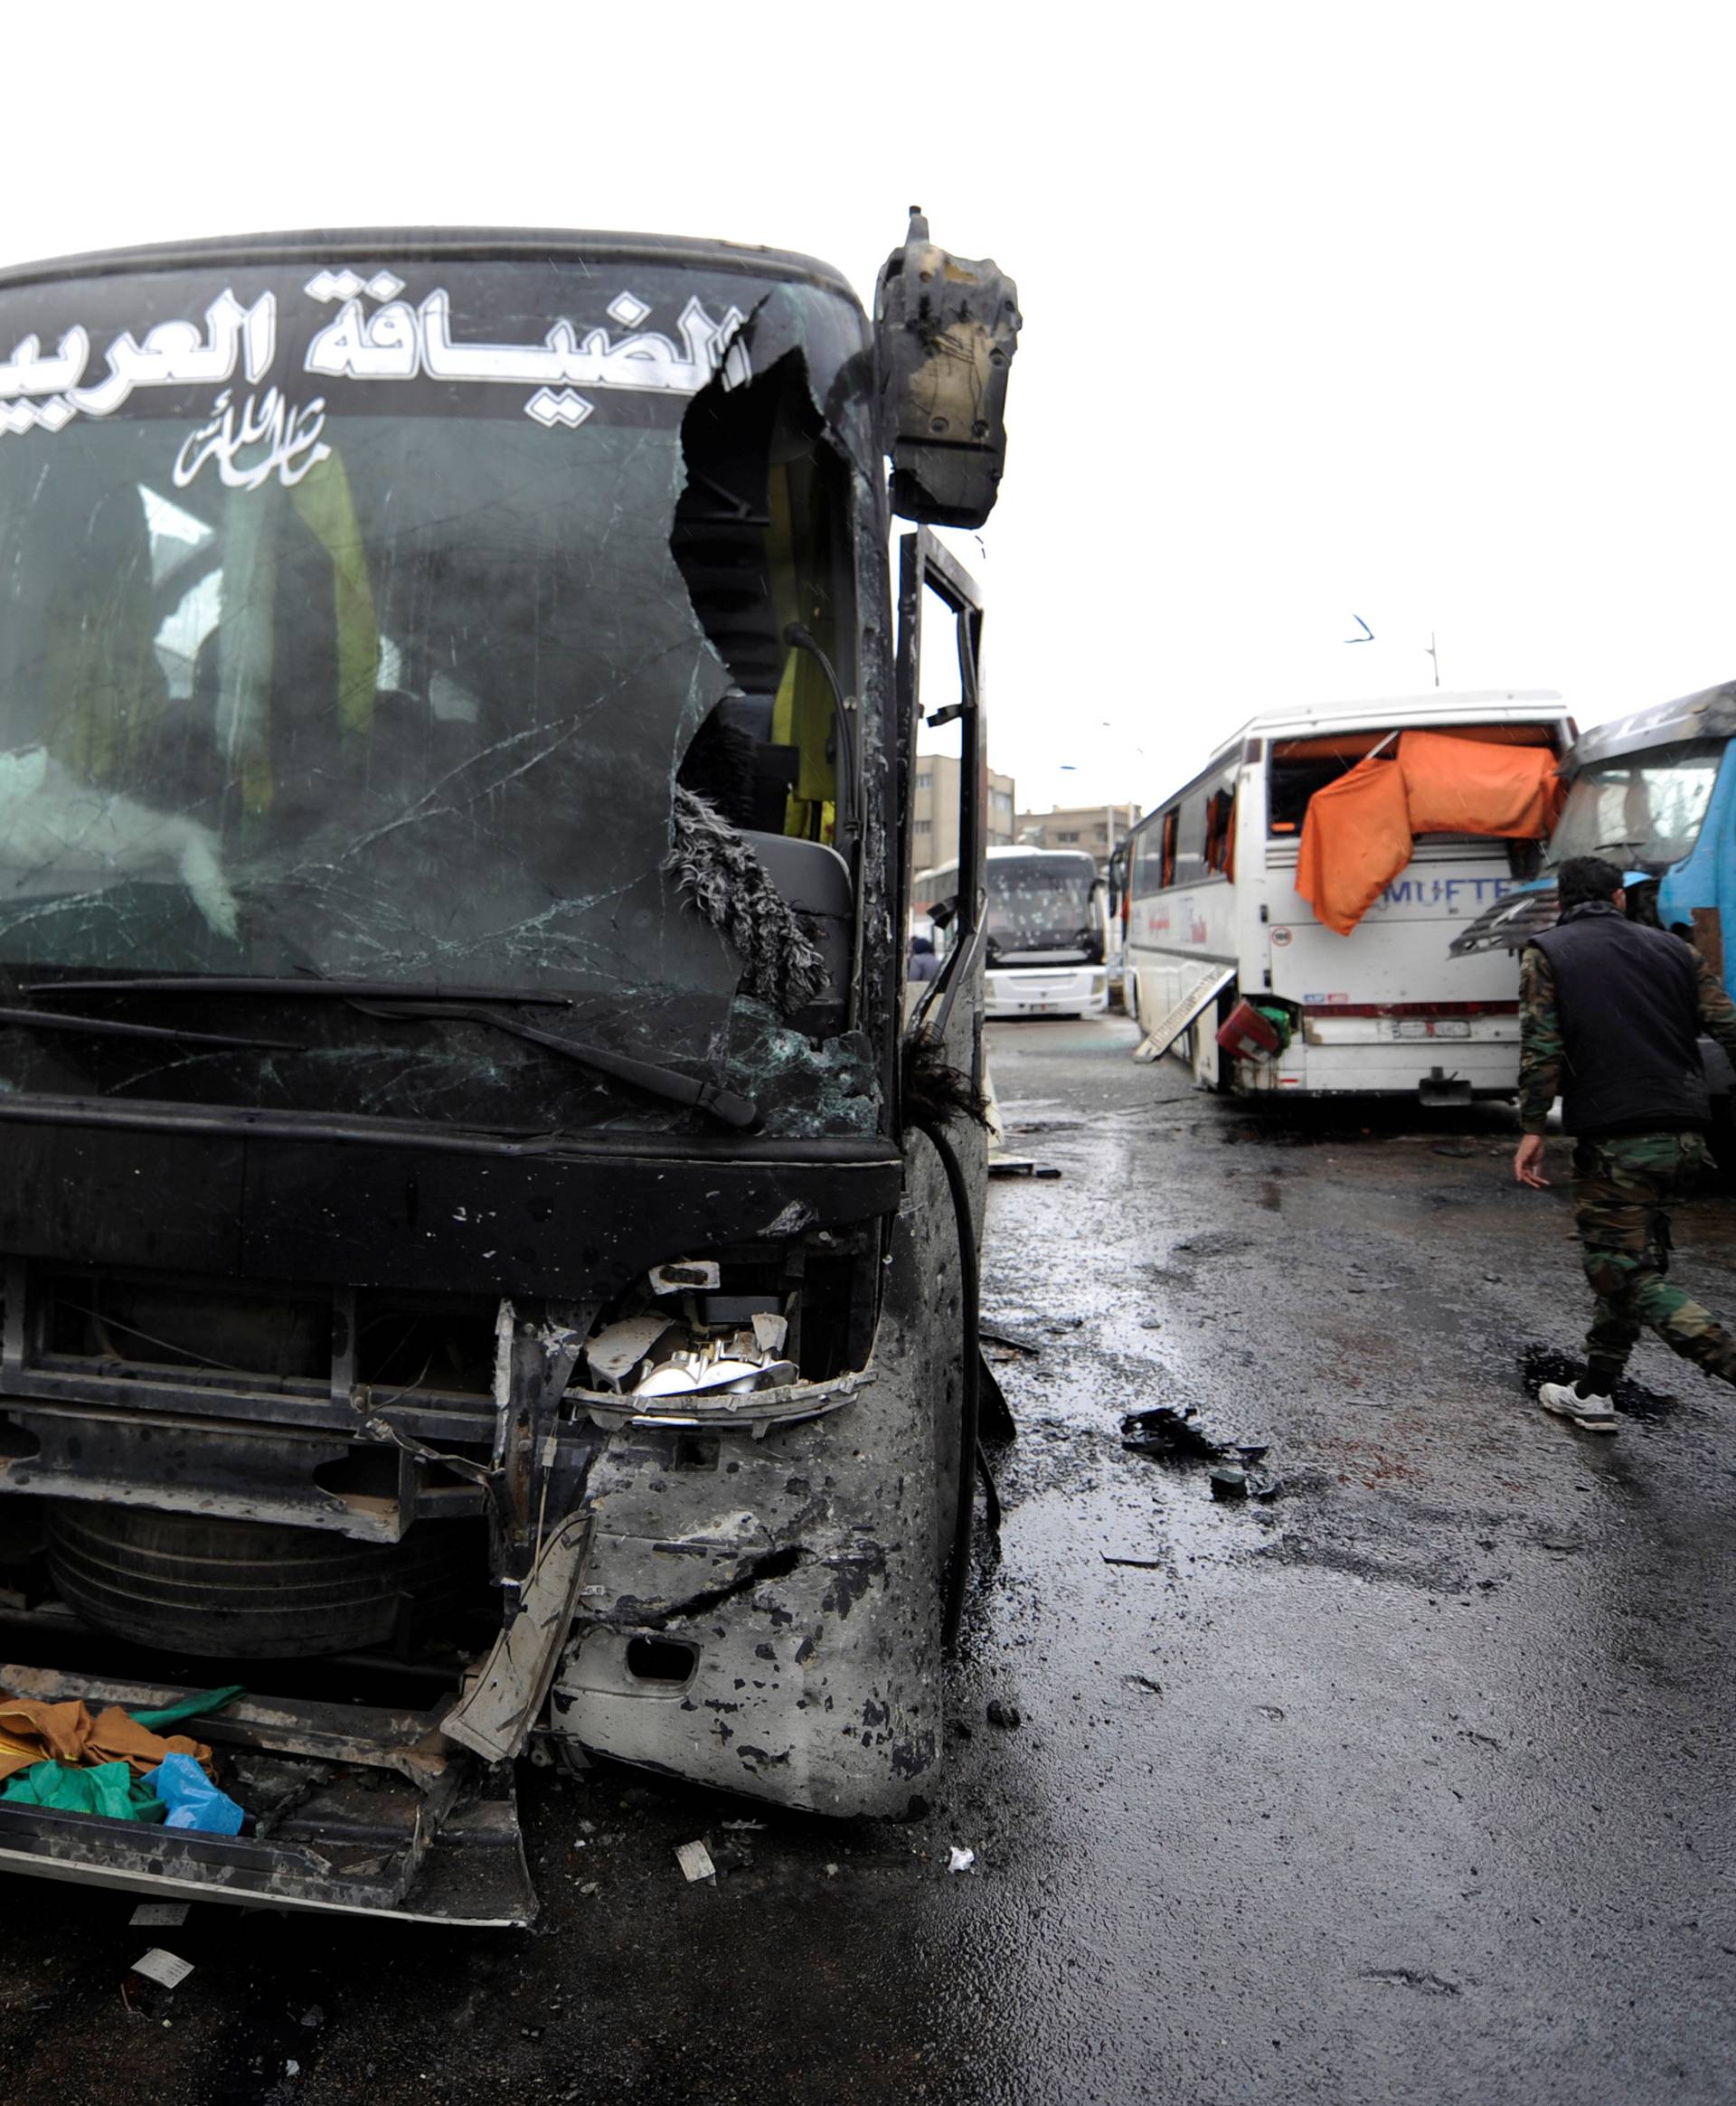 Damaged buses are pictured at the site of an attack by two suicide bombers in Damascus